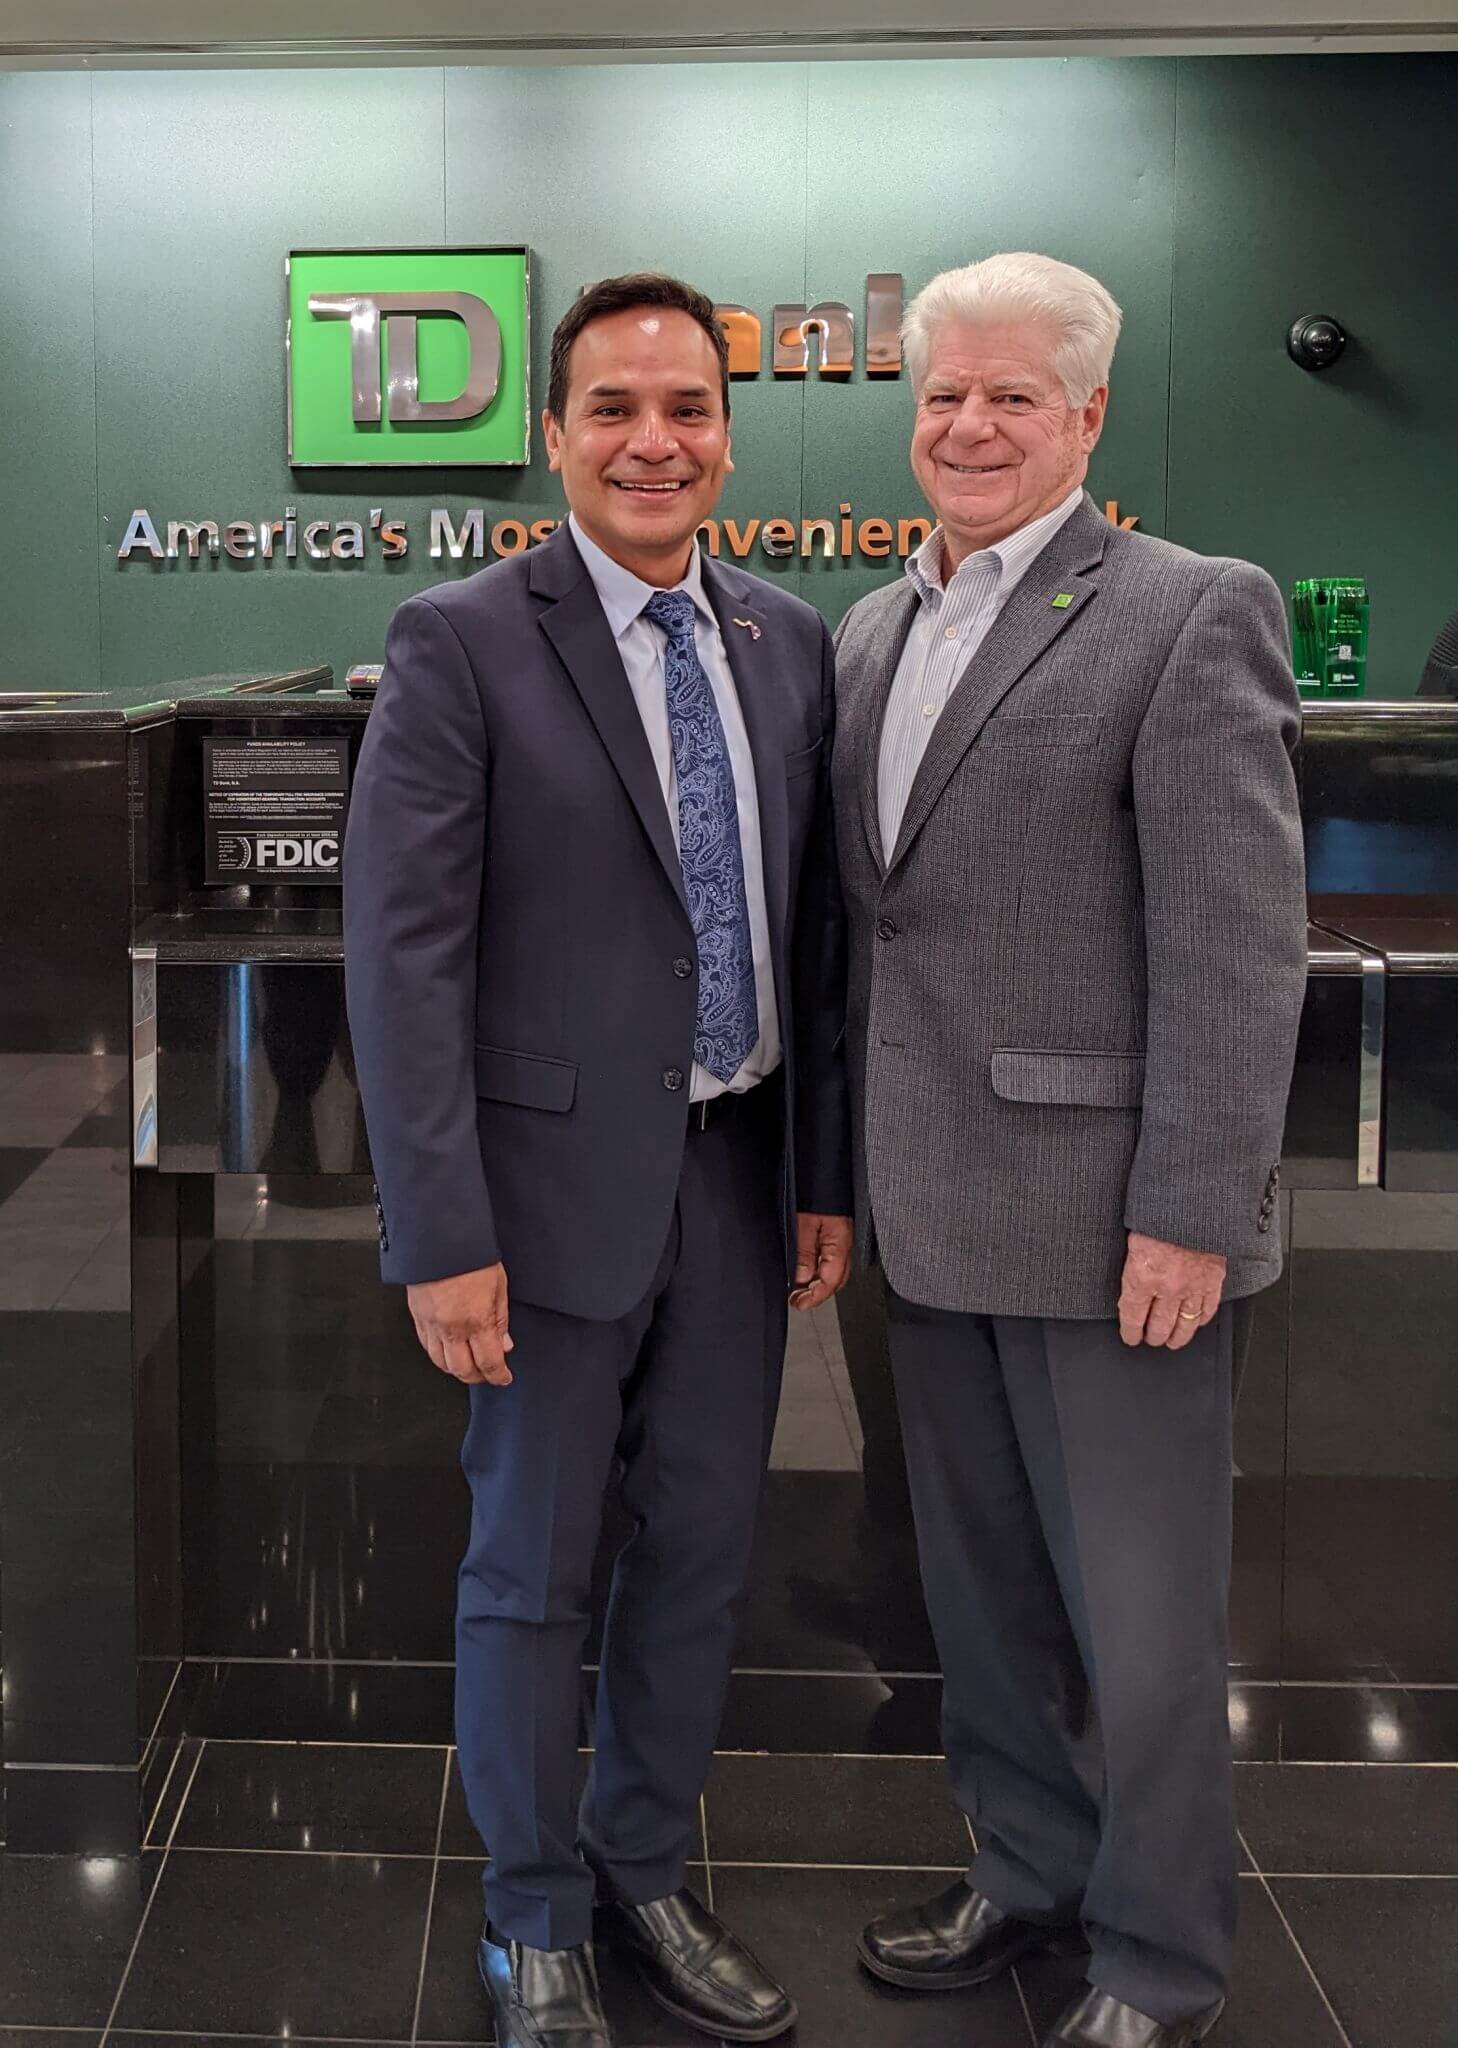 Gus Penaranda, NJPCC Executive Director and Thomas M. Hewitt Sr., the Regional Sponsorship Manager for TD Bank pose during the check presenting ceremony for their sponorship.